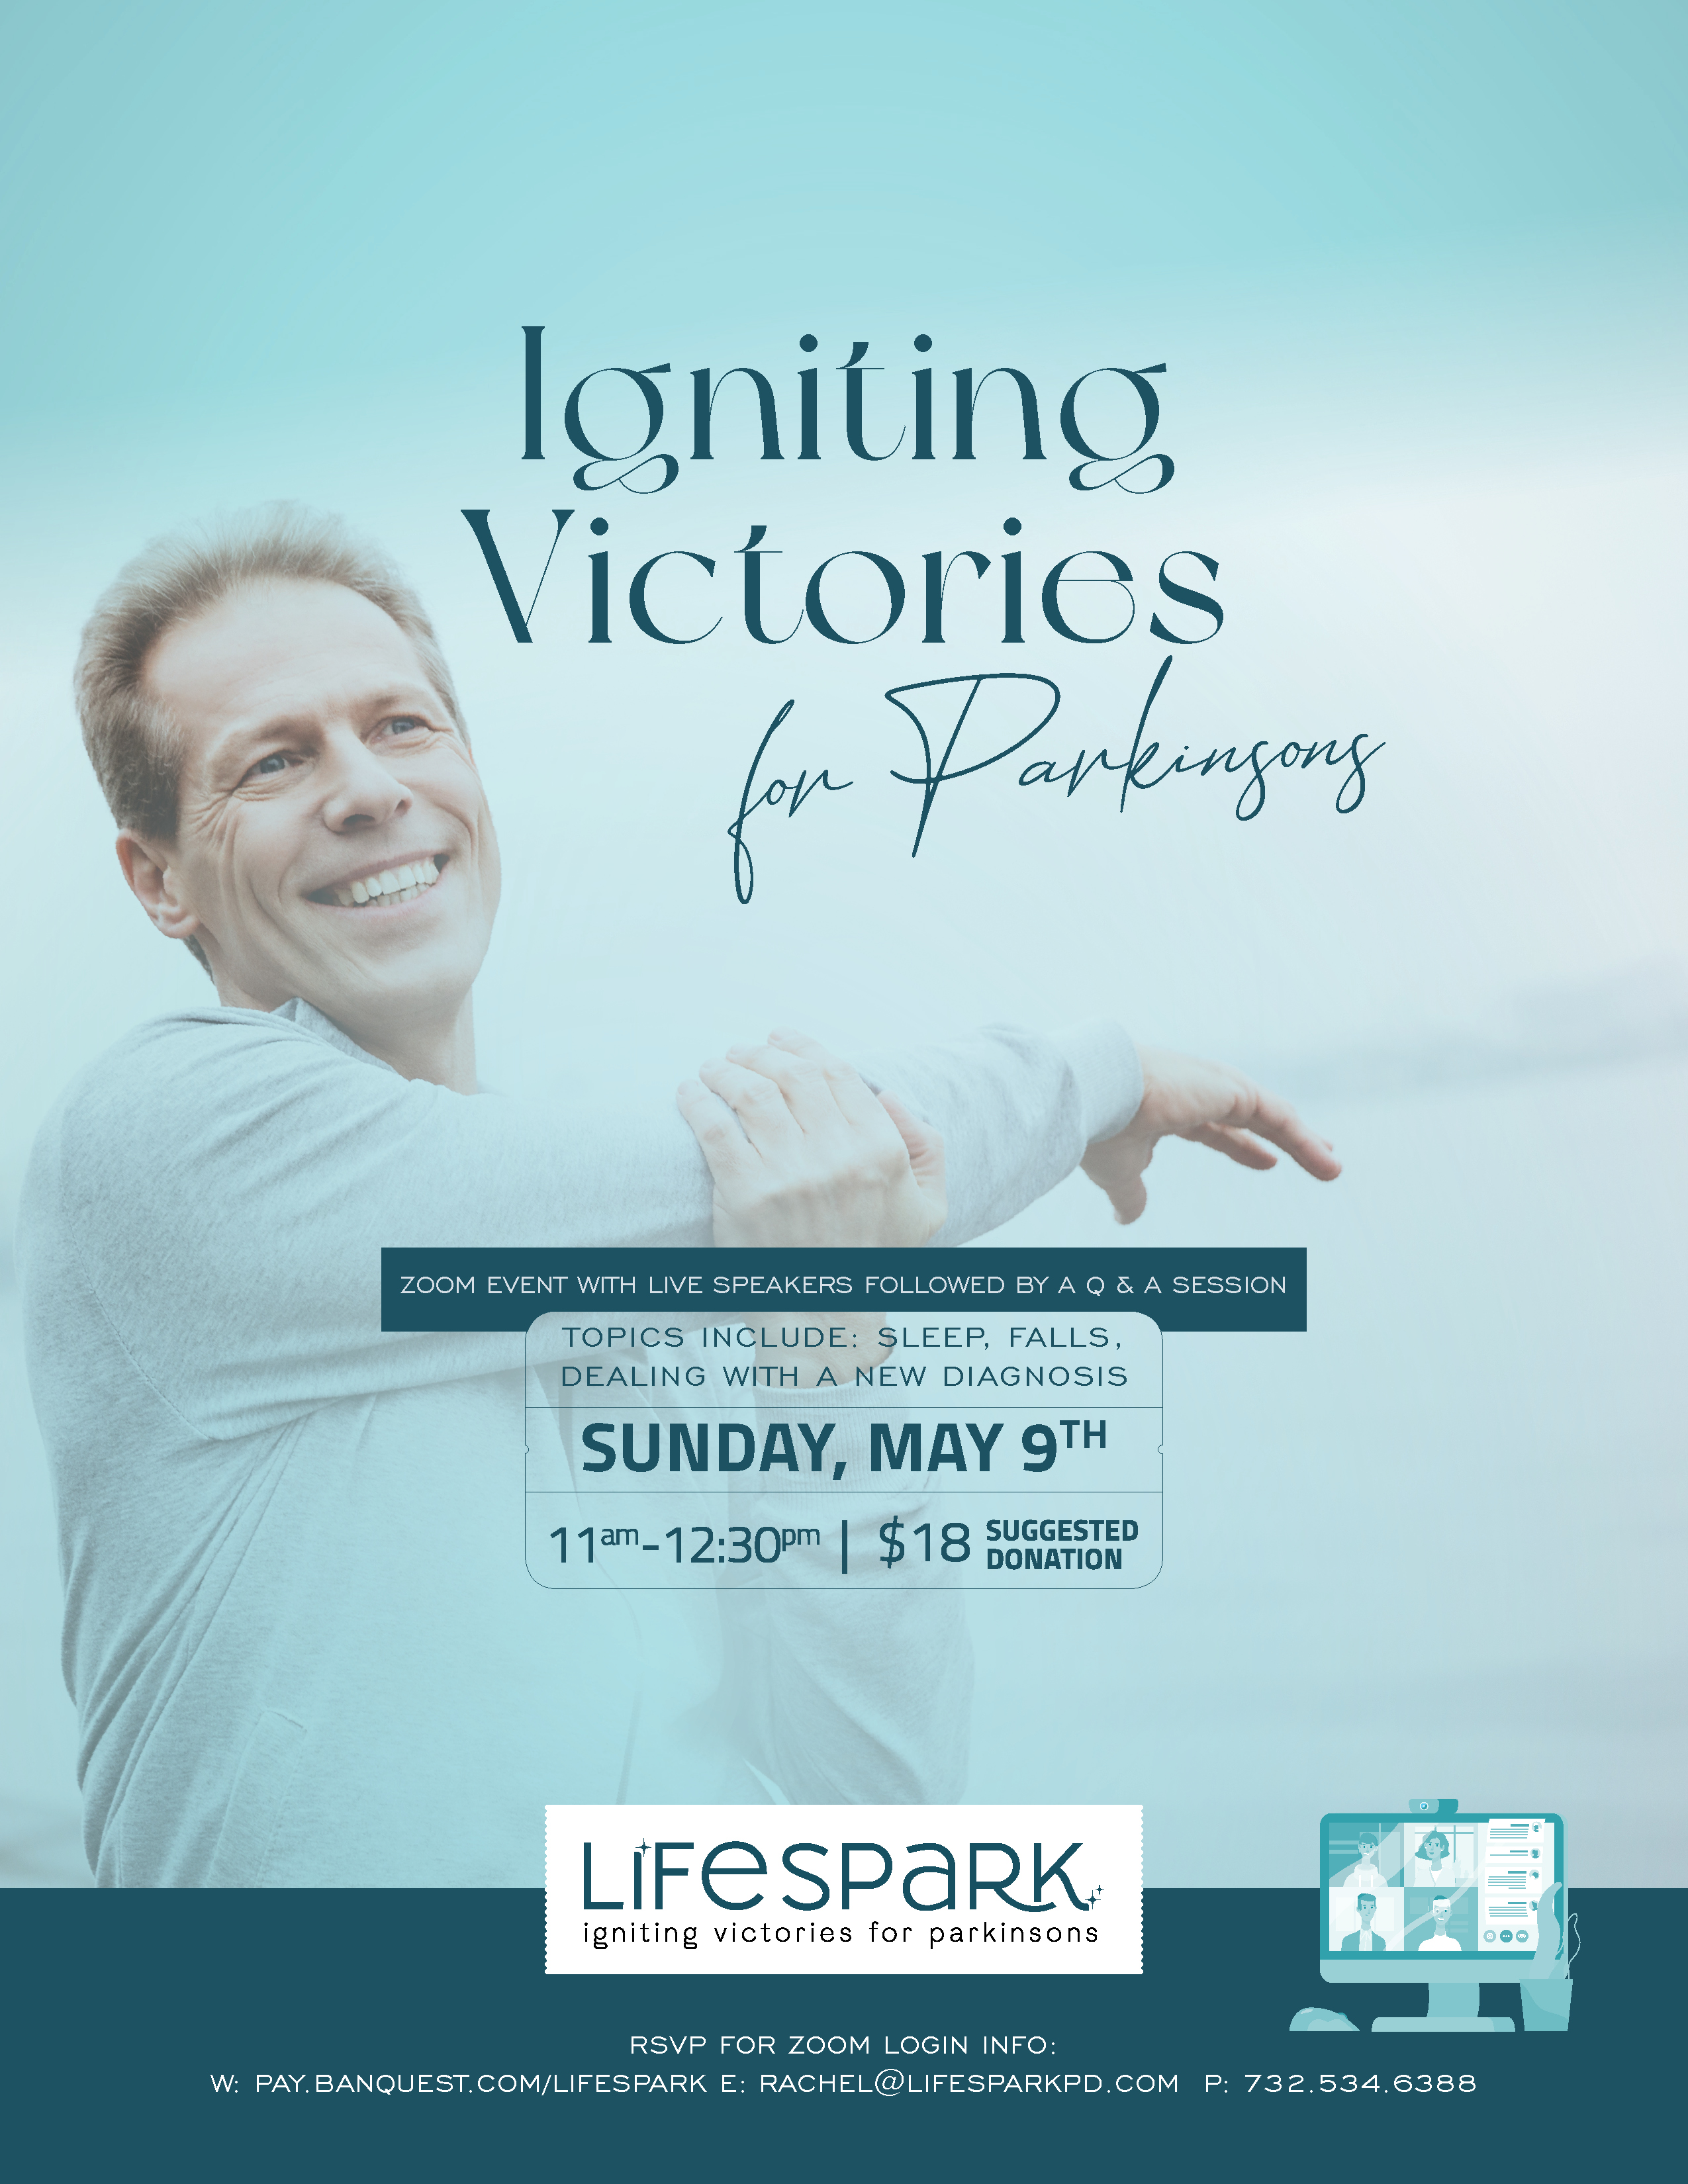 Igniting Victories for Parkinsons